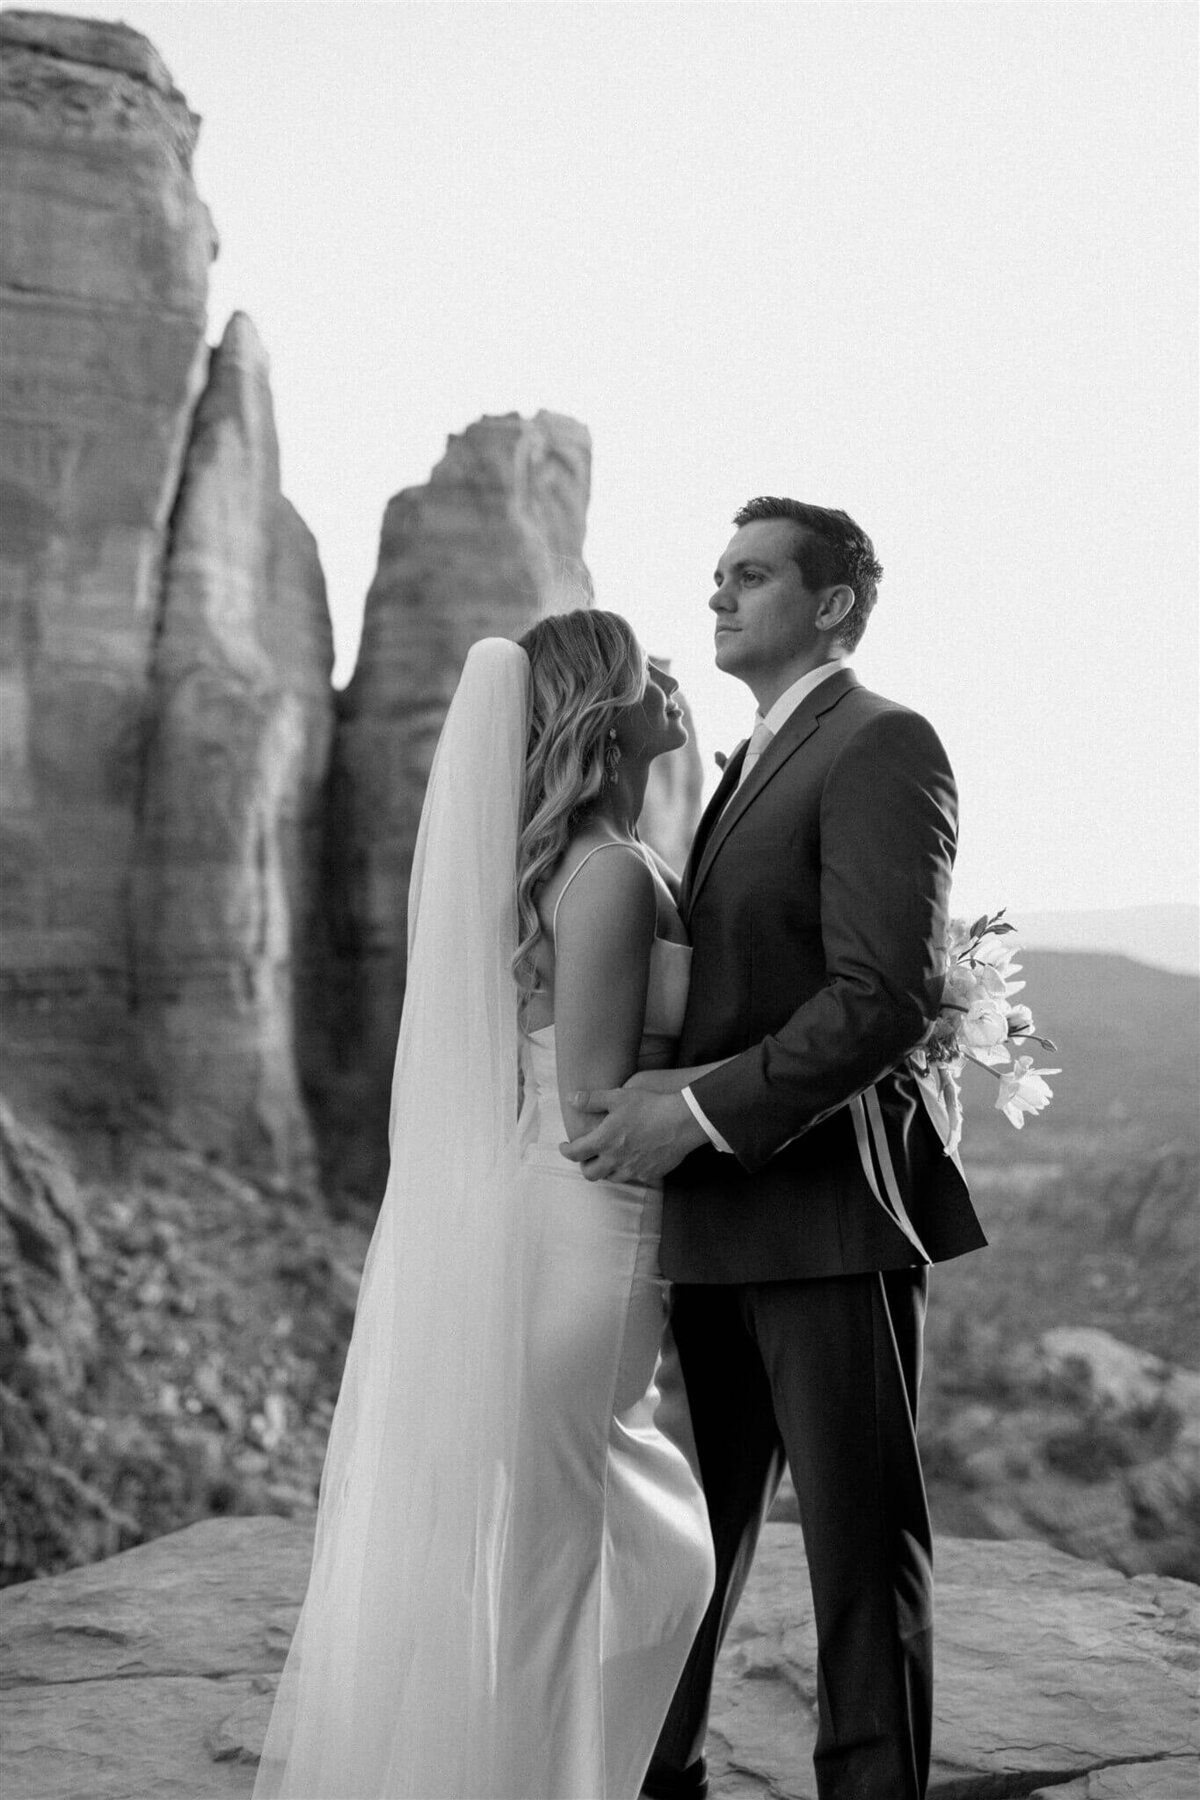 tinted-events-design-and-planning-sedona-wedding-portrait-black-and-white-5-photography-memories-by-lindsay-destination-wedding-planning